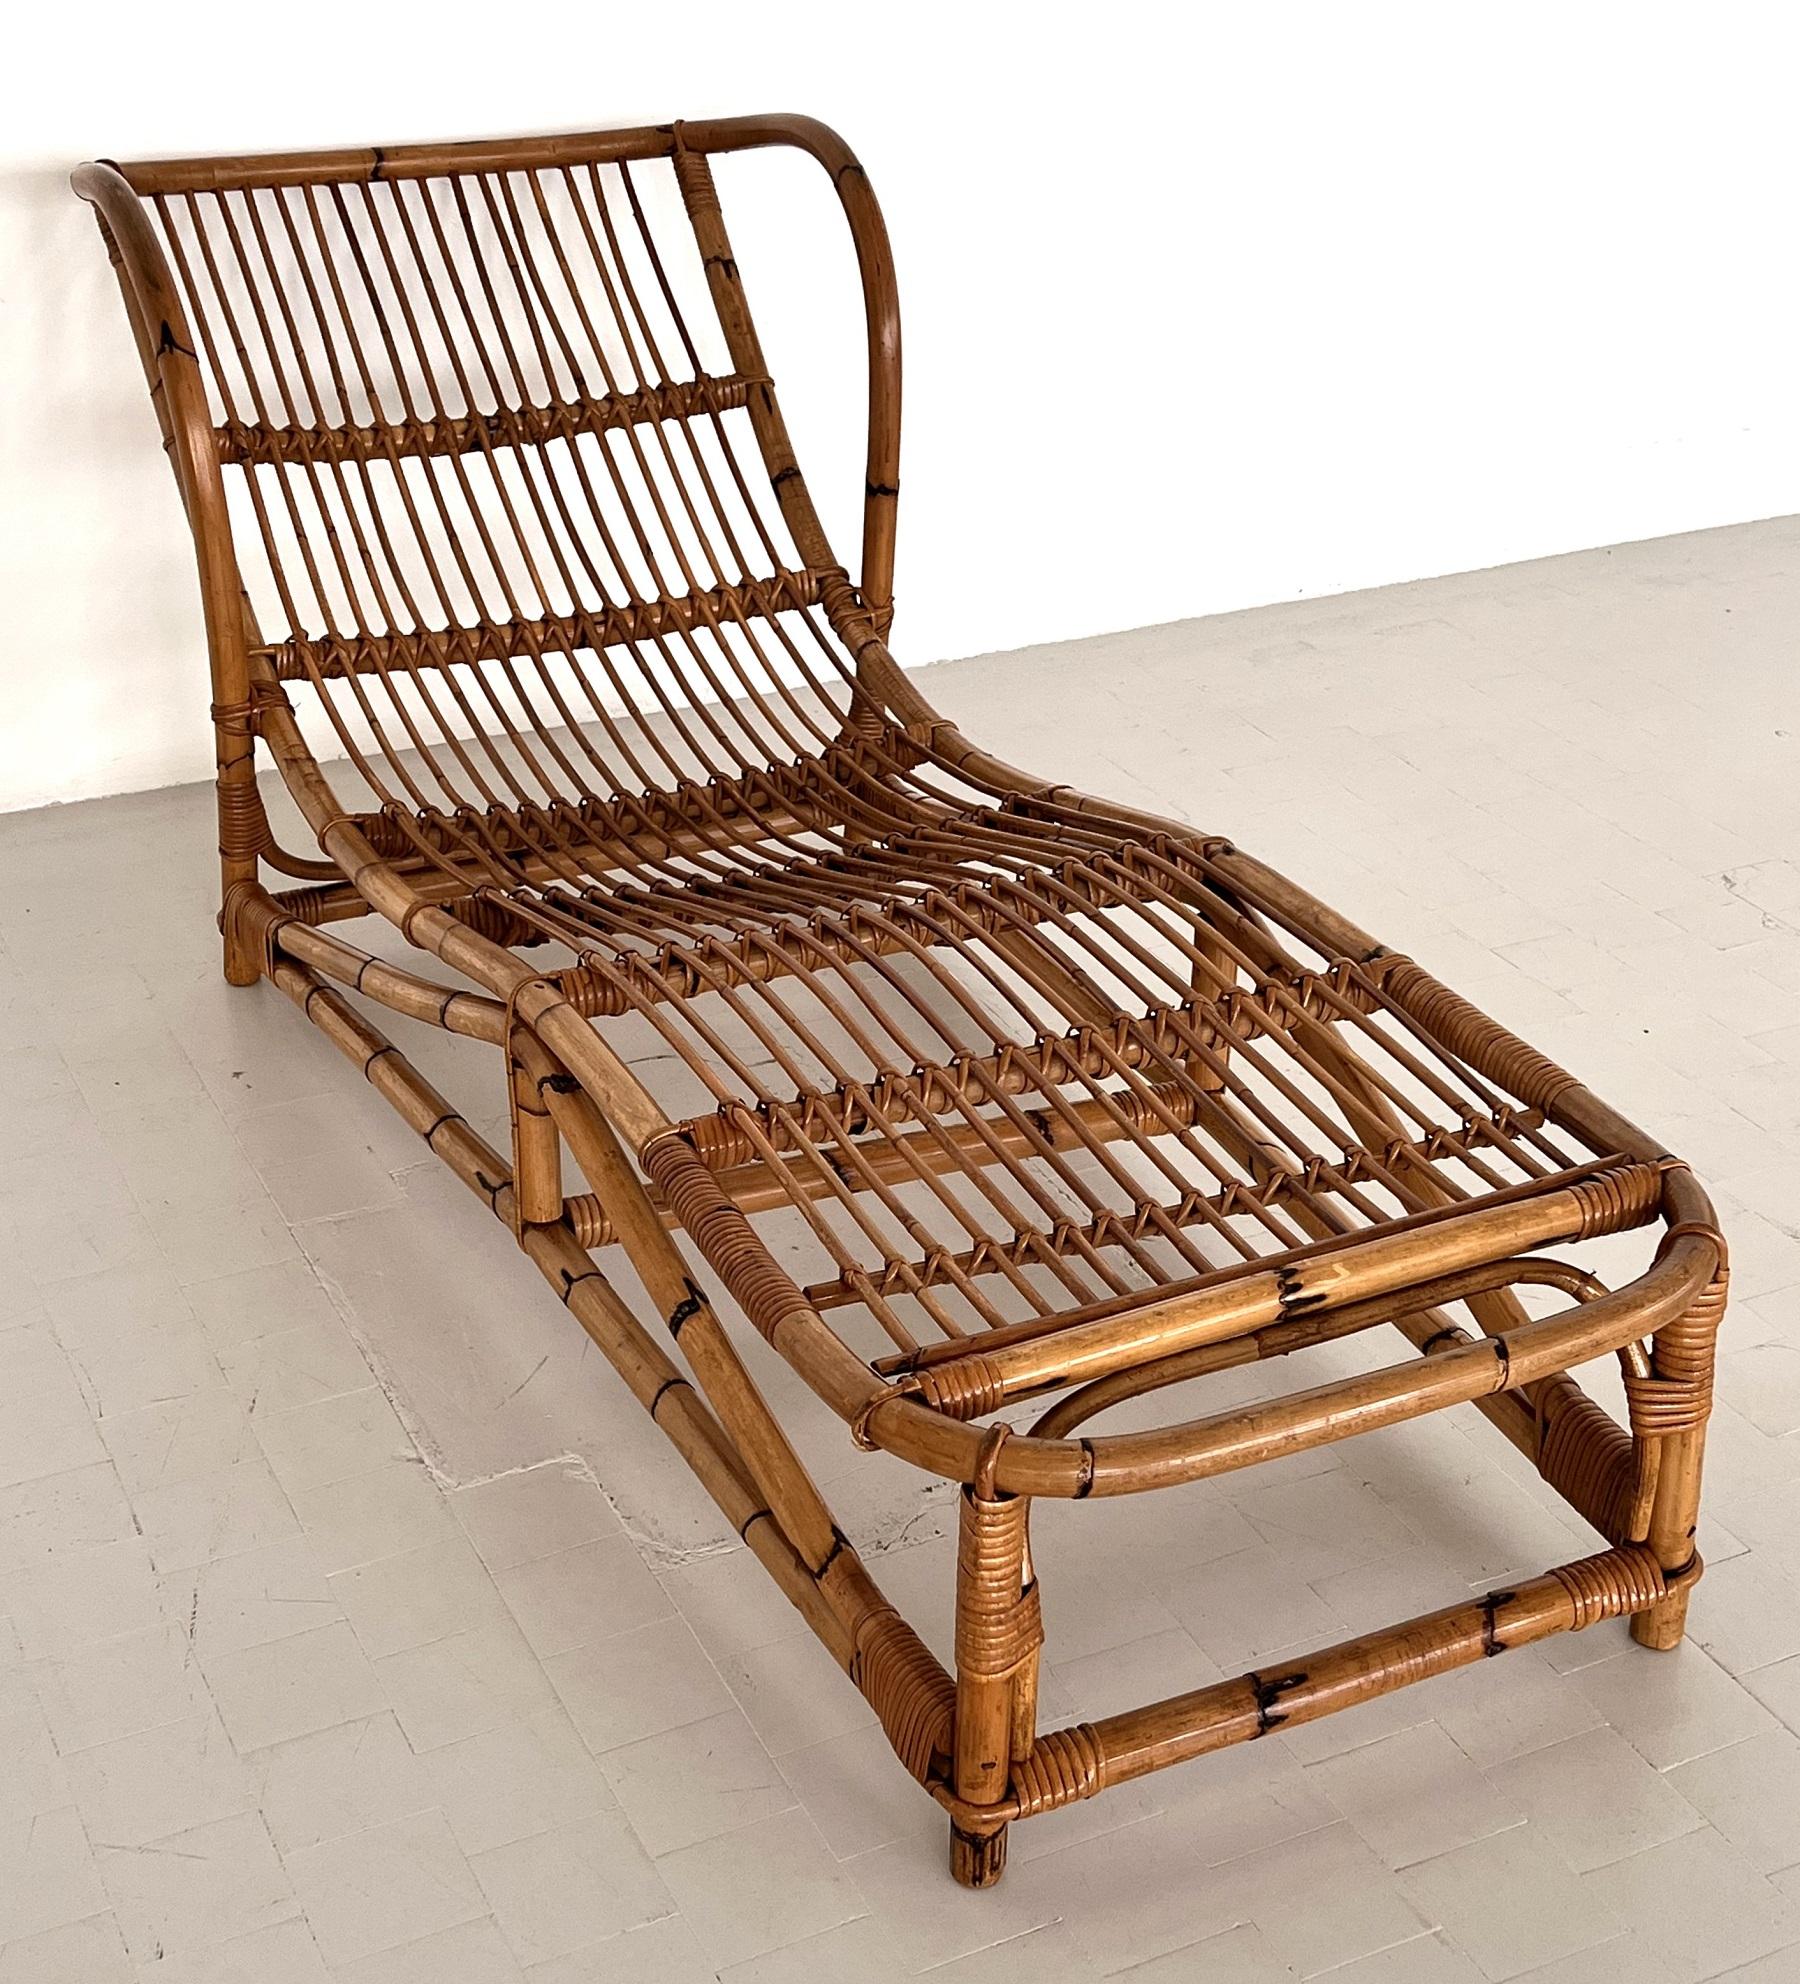 Italian Midcentury Organic Bamboo Daybed or Sunbed For Sale 4